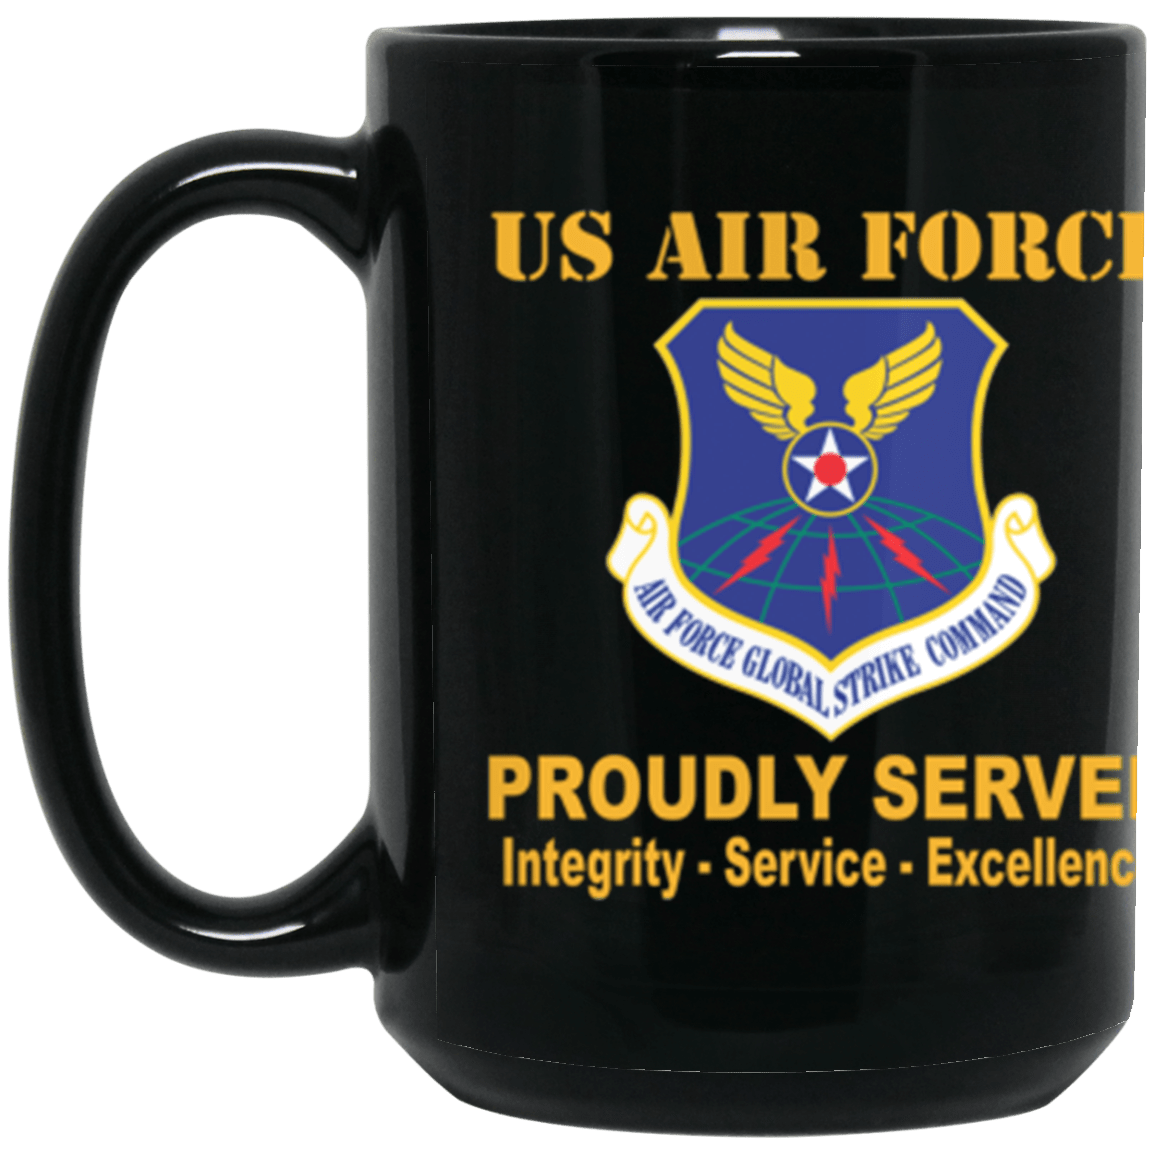 US Air Force Air Force Global Strike Command Proudly Served Core Values 15 oz. Black Mug-Drinkware-Veterans Nation